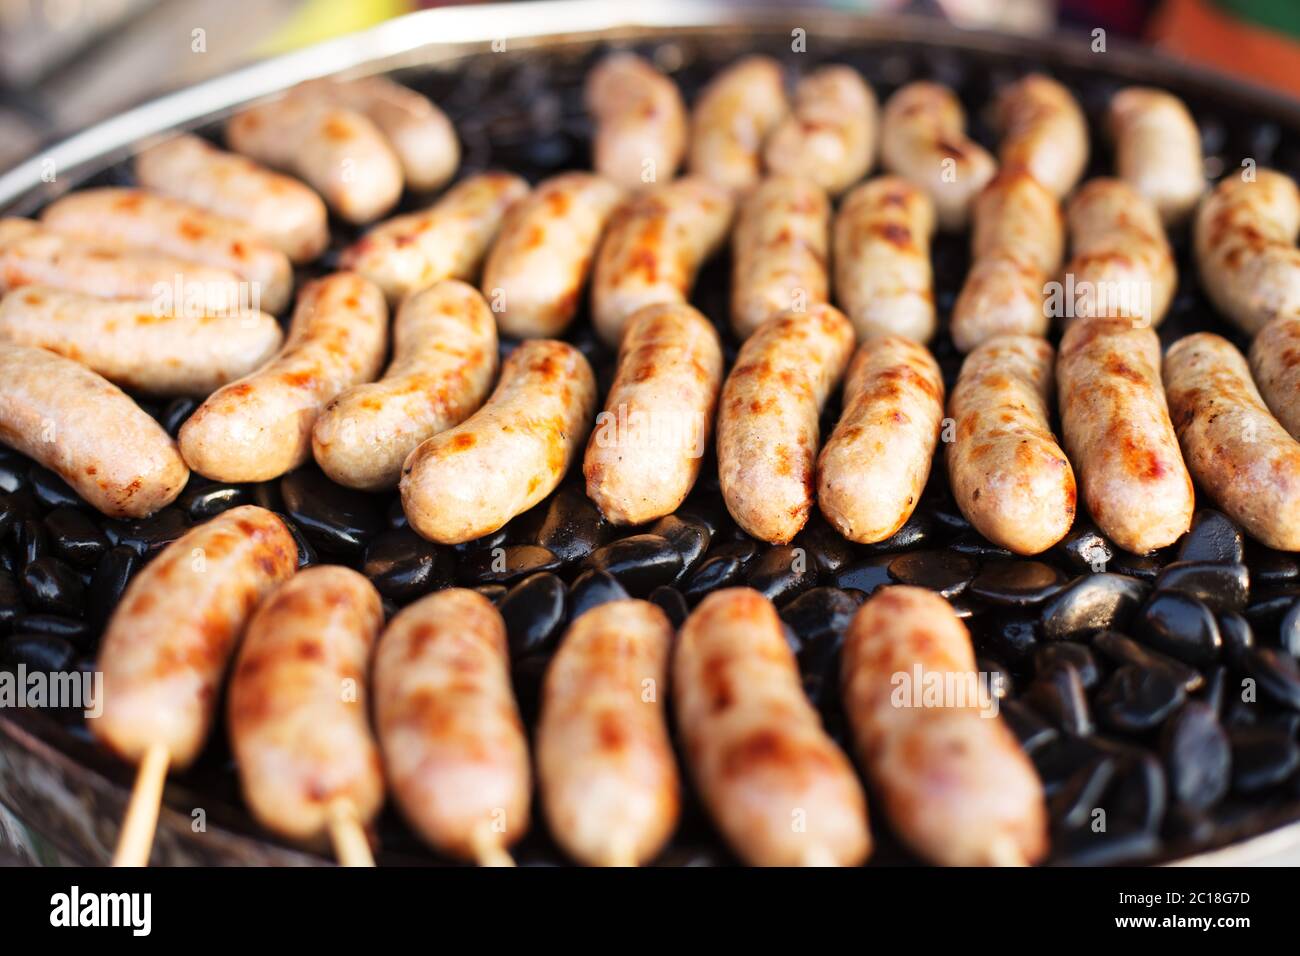 tasty roasted saussages Stock Photo